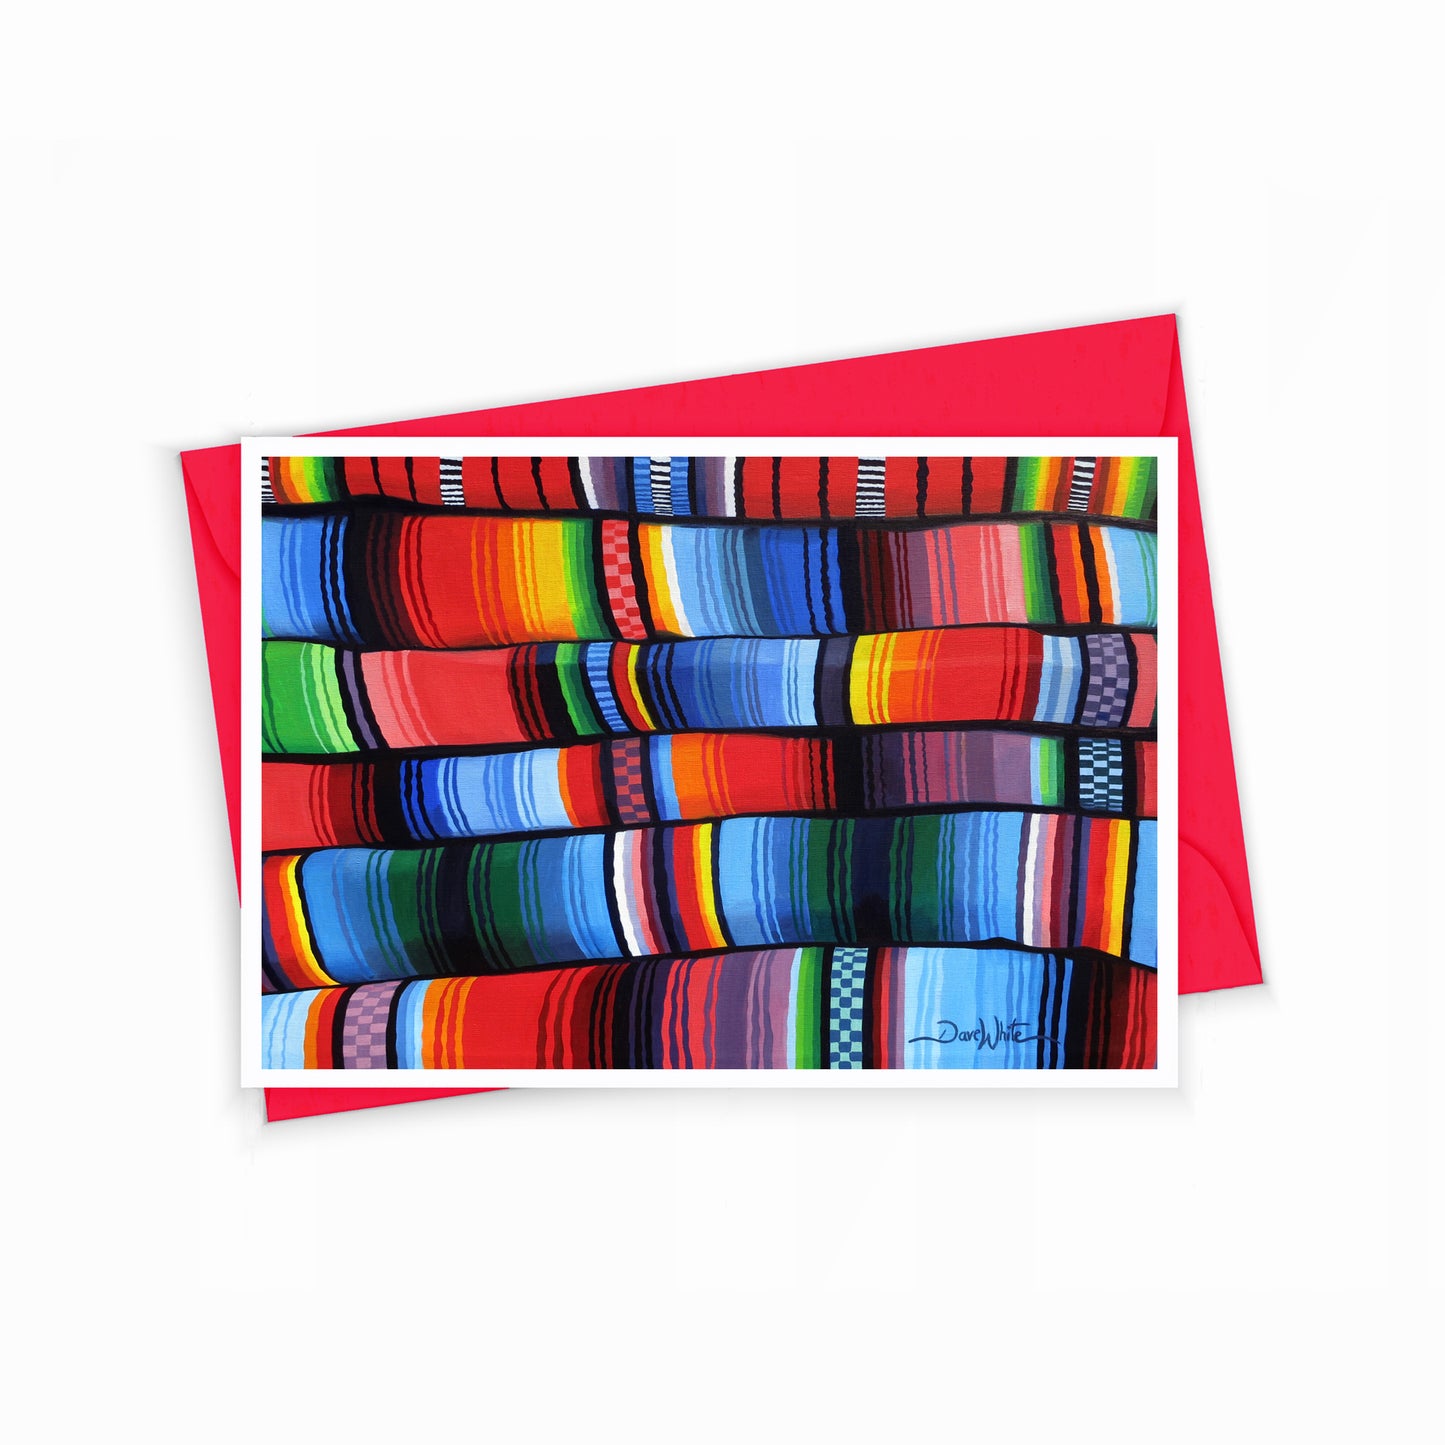 Indigenous Design Greeting Card by Artist Dave White